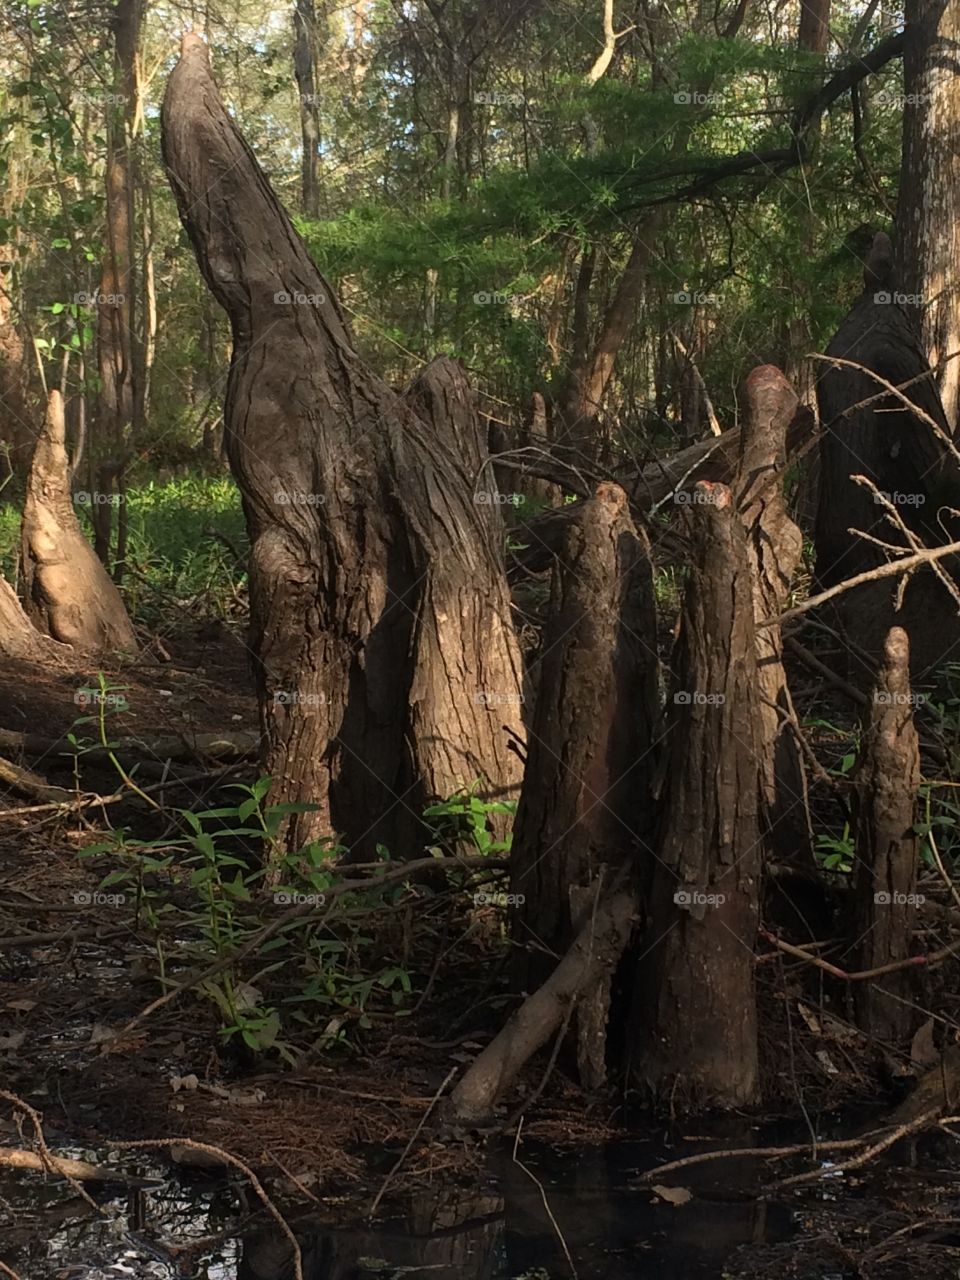 Swamp cypress knees and trees